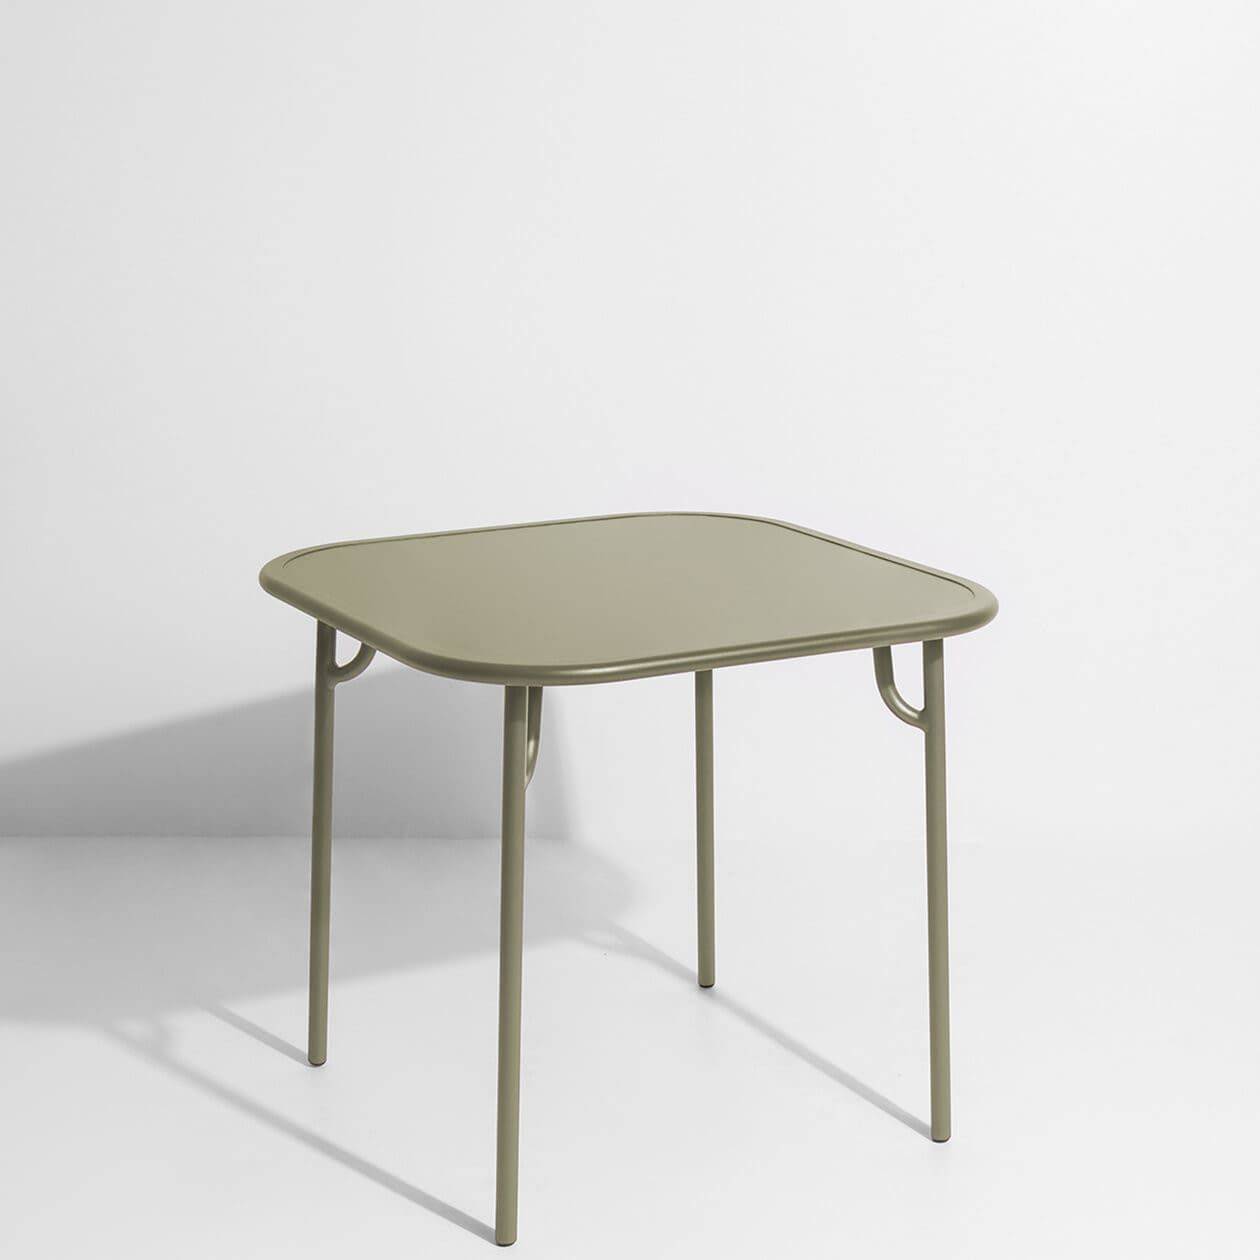 Week-End Plain Square Dining Table - Jade green